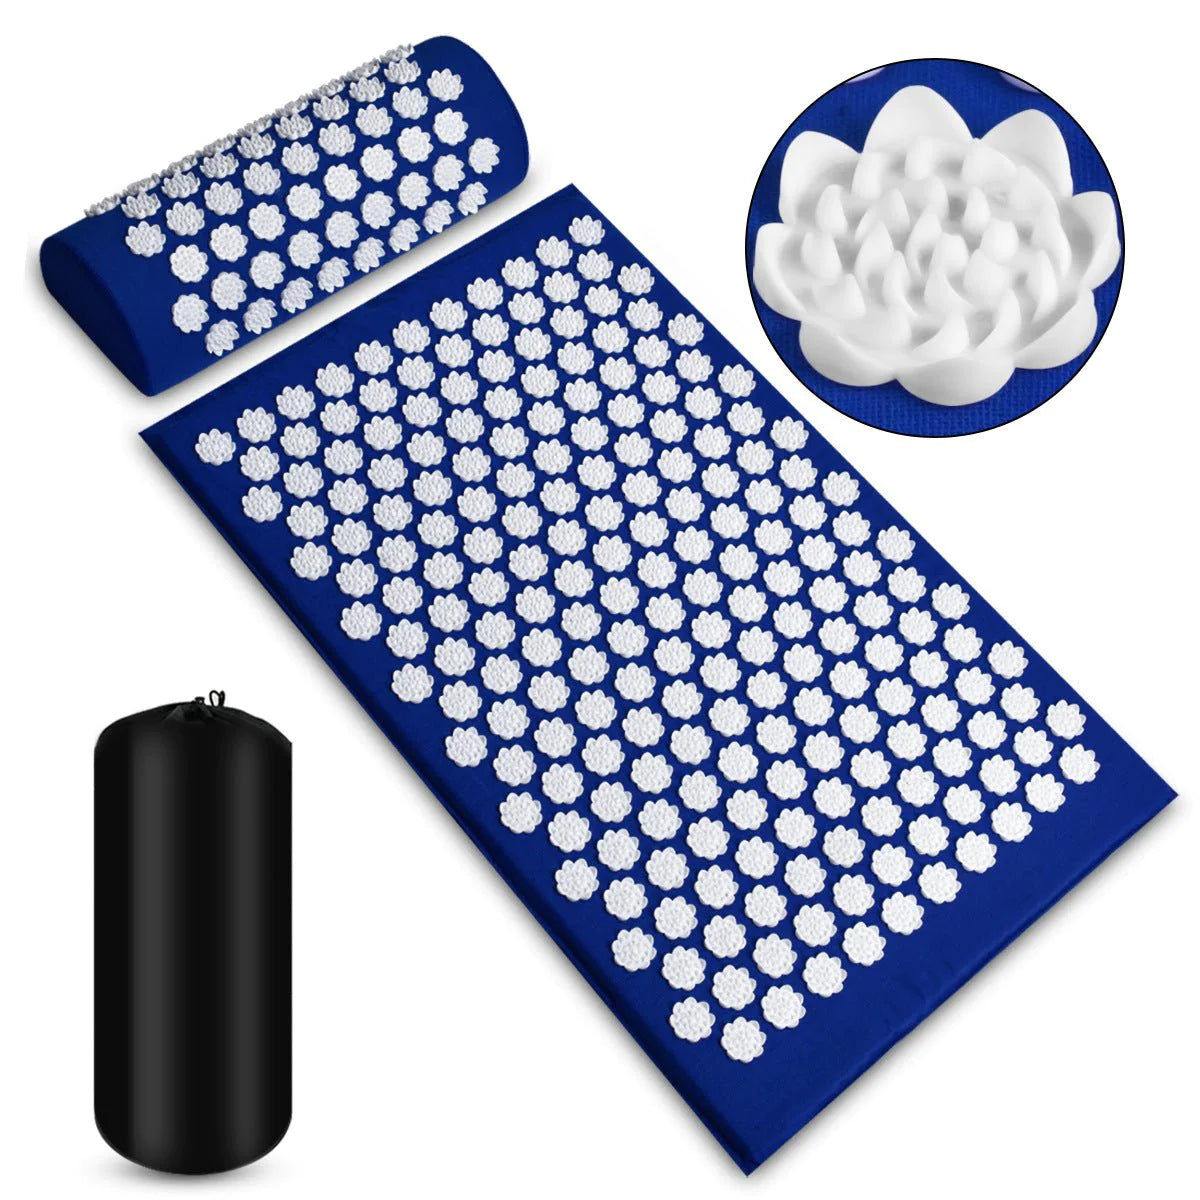 Lotus Acupressure Yoga Mat: Stress Relief & Discomfort Reduction - Eco-Friendly, Non-Slip Mat with Massage Points